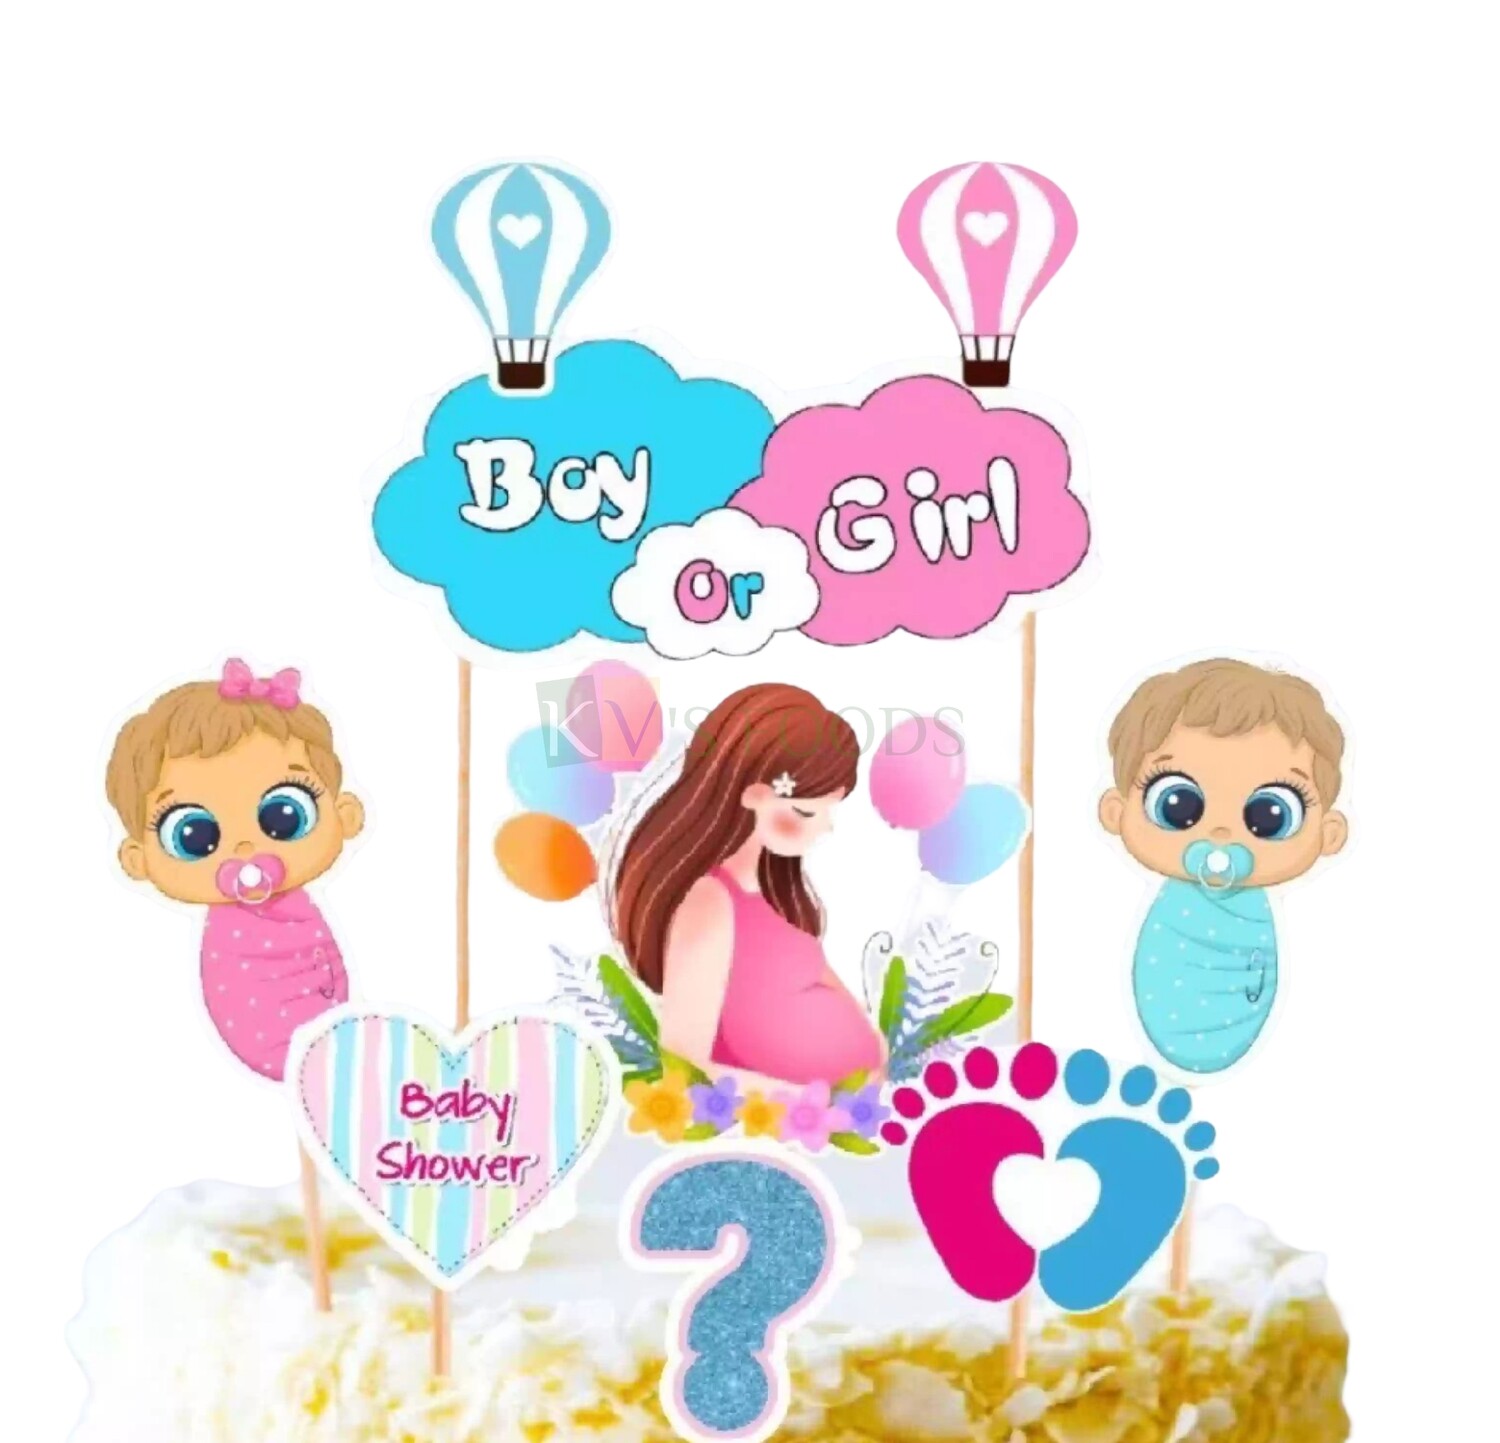 7 PC Baby Shower, He or She, Boy or Girl Theme, Cake Topper Insert, Cake Topper, Cupcake Toppers Bday, Girls, Boys, Friends Bday Decorations Items/Cake Accessories, Tags, Cards, Cake Toothpick Topper